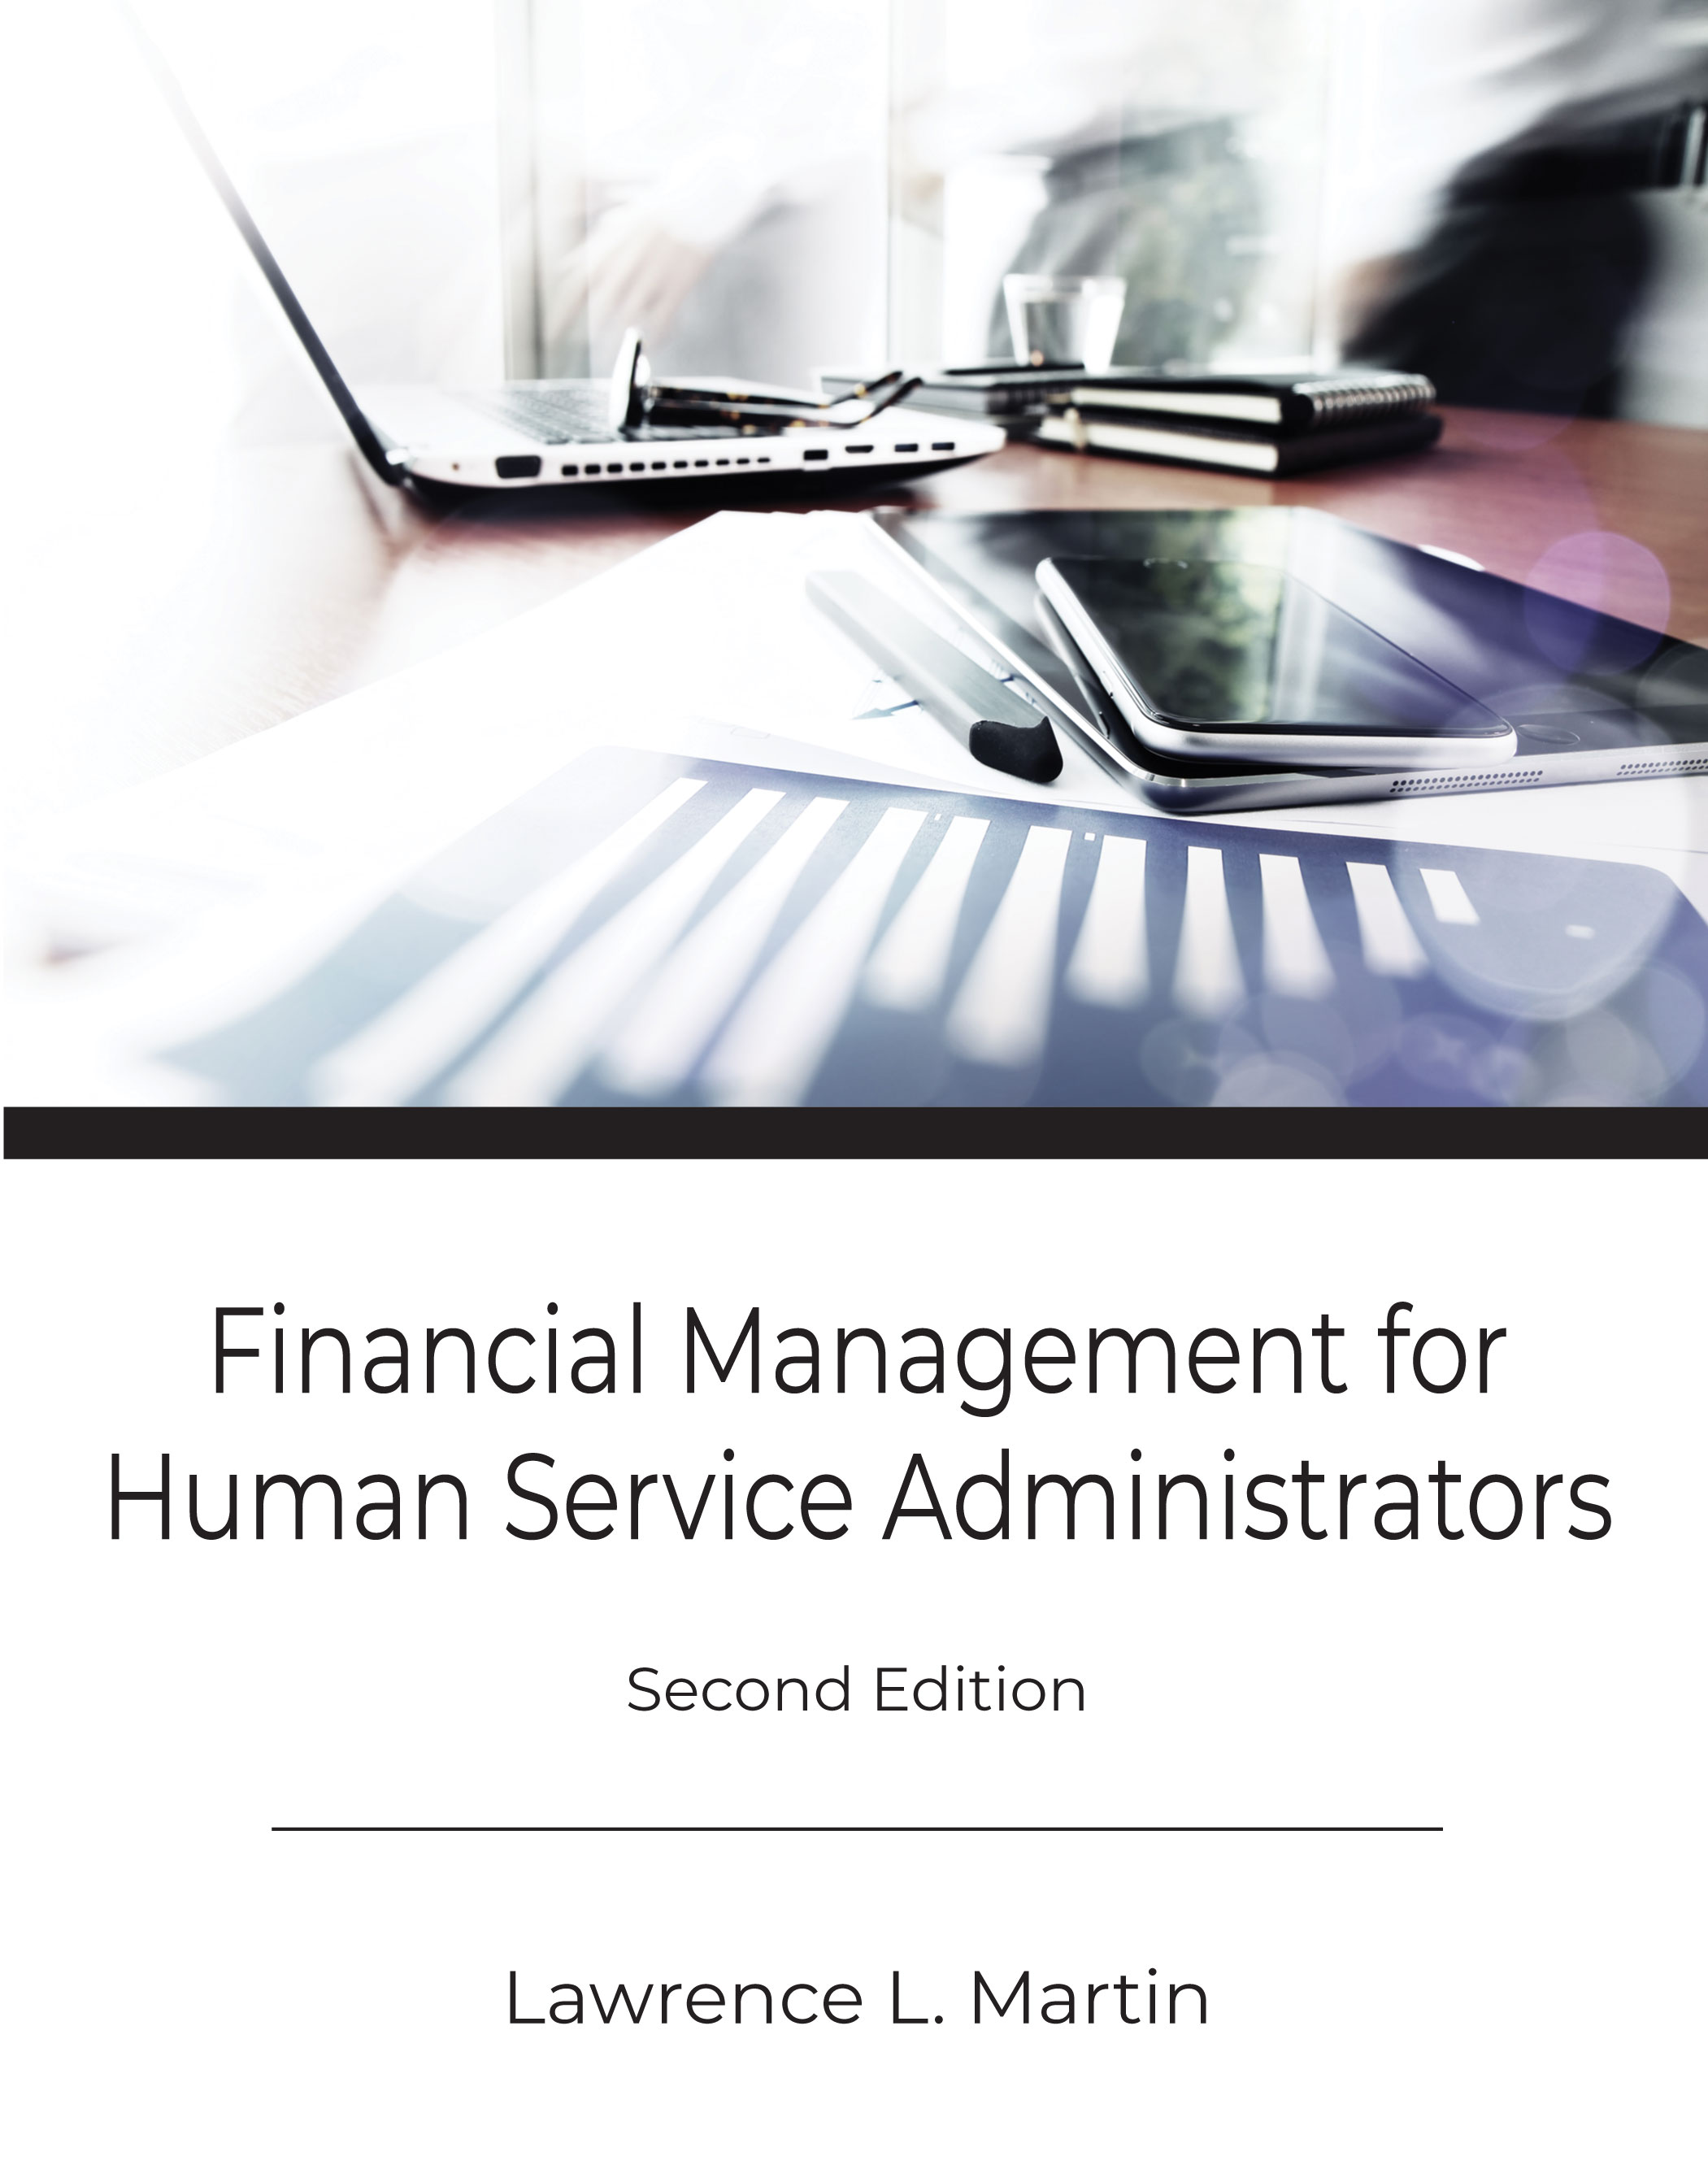 Financial Management for Human Service Administrators: Second Edition by Lawrence L. Martin